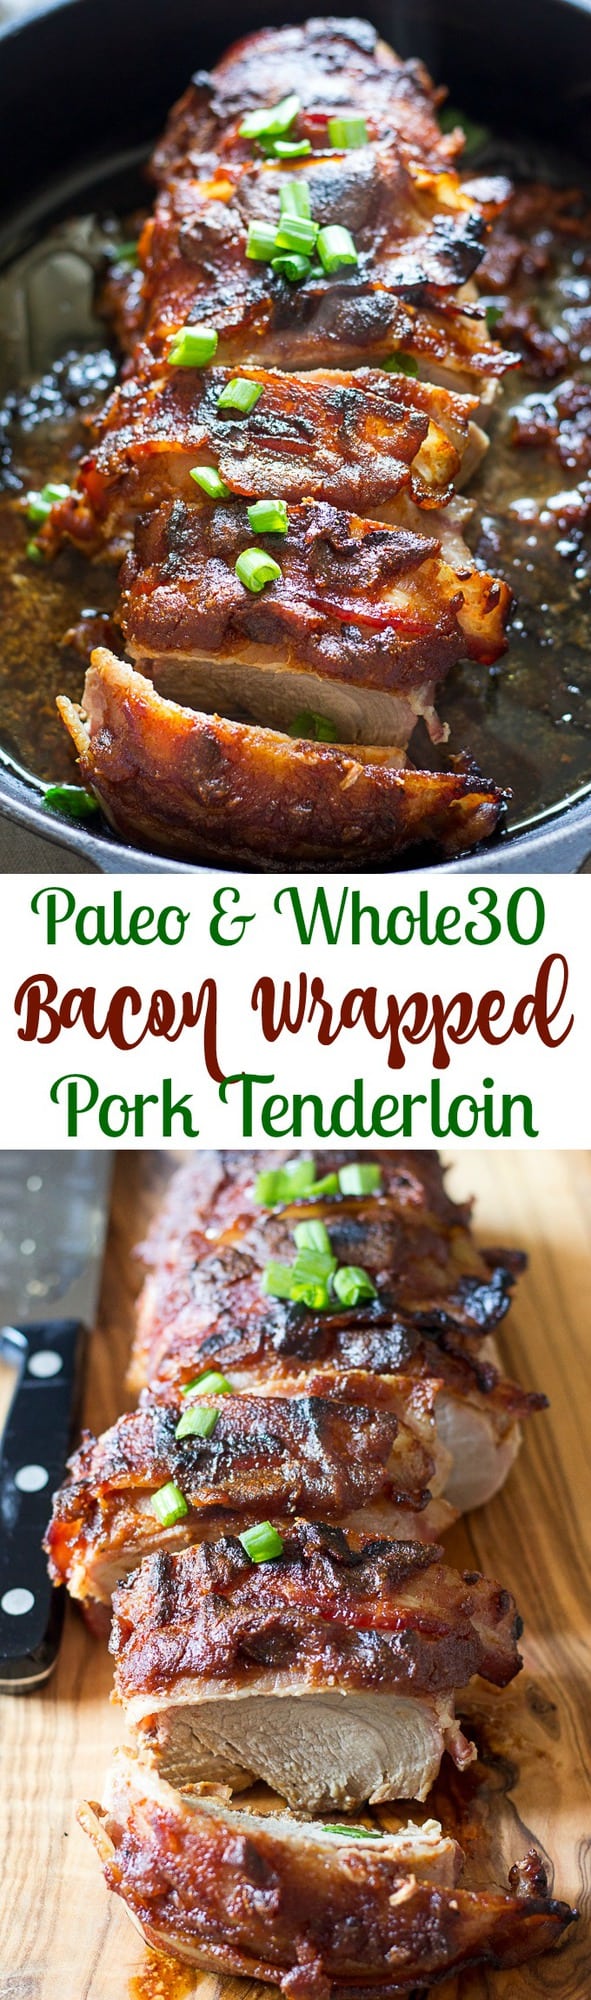 This Paleo and Whole30 Bacon Wrapped Pork Tenderloin has a sweet and smoky sauce that's refined sugar free, incredibly delicious and even kid friendly!  Paleo dinner recipe that can easily be doubled for a crowd and the prep is just 10 minutes. 